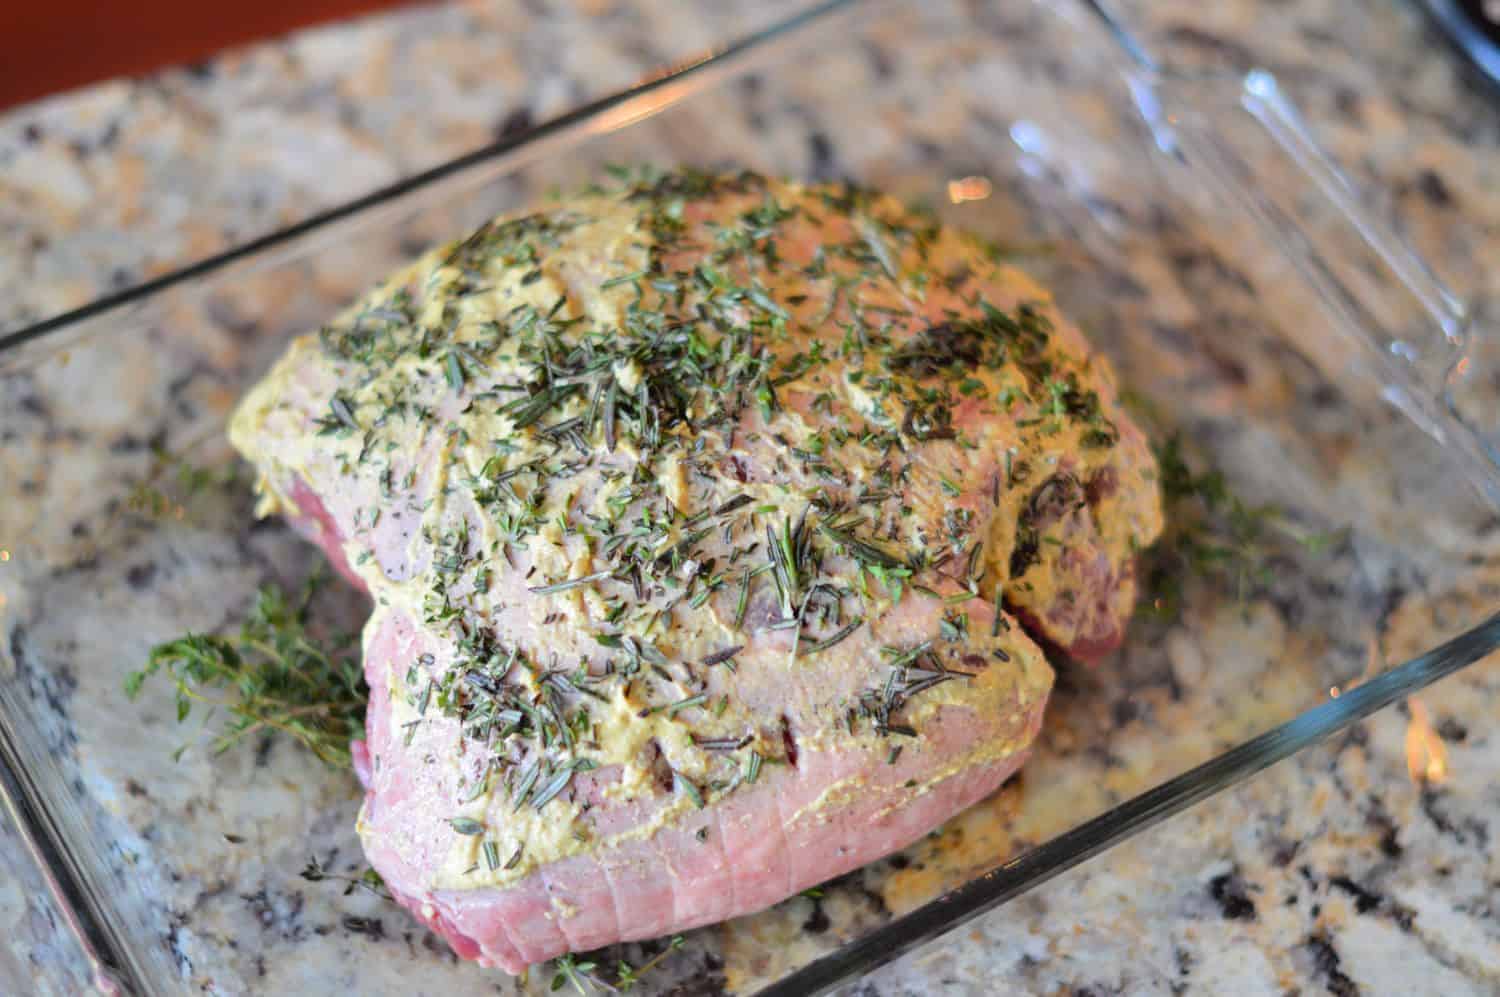 Leg of Lamb Roast Recipe- an easy lamb recipe to serve for Easter dinner or any other night of the year! Easily take this spice rub and use it on lamb chops as well. www.savoryexperiments.com 